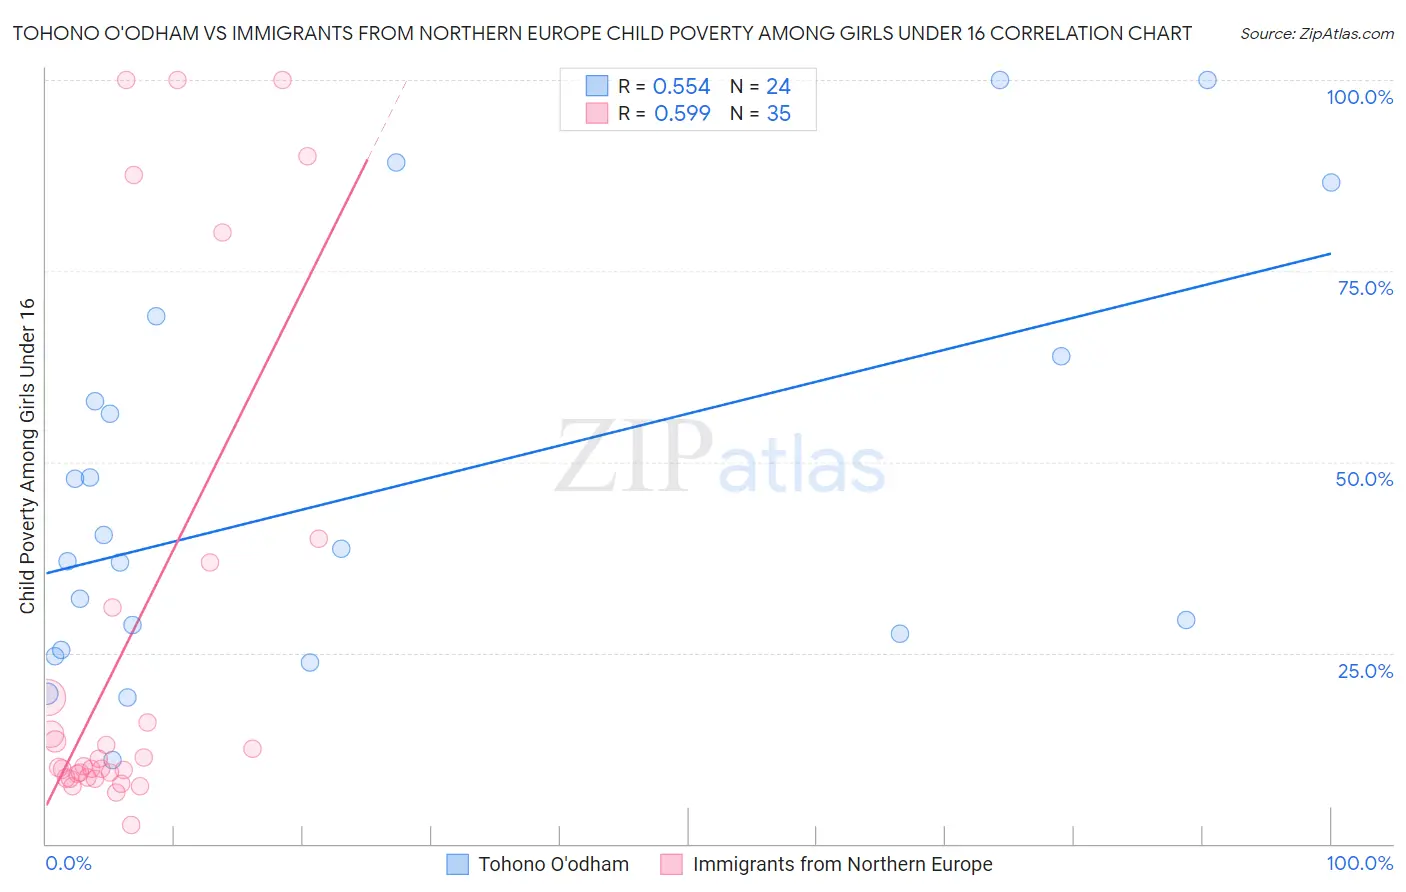 Tohono O'odham vs Immigrants from Northern Europe Child Poverty Among Girls Under 16